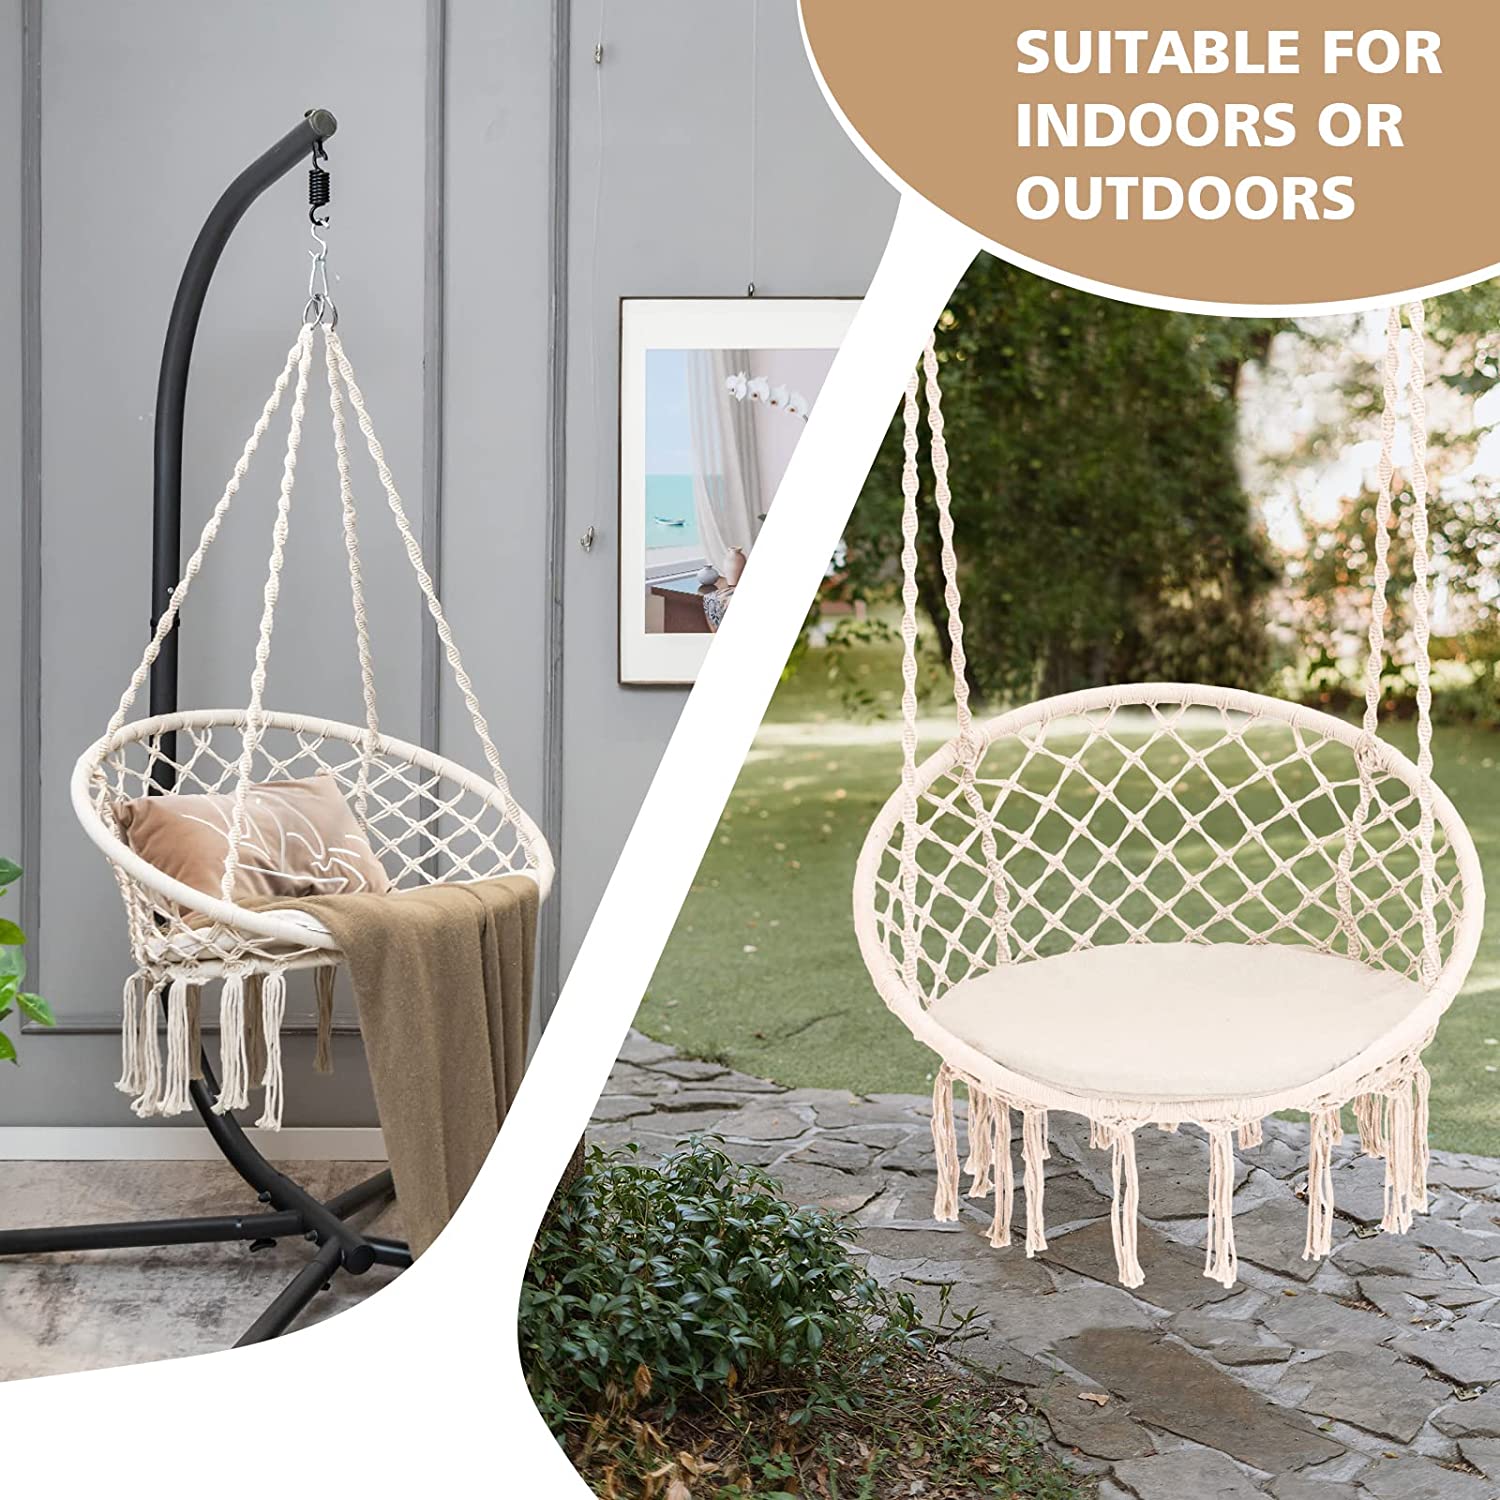 Hammock Chair Macrame Swing - Hanging Chair with Cushion and Hardware Kit,  Indoor Swing for Hammock Stand, Patio, Balcony, Living Room, 330 LBS Weight Capacity, Beige - image 5 of 9